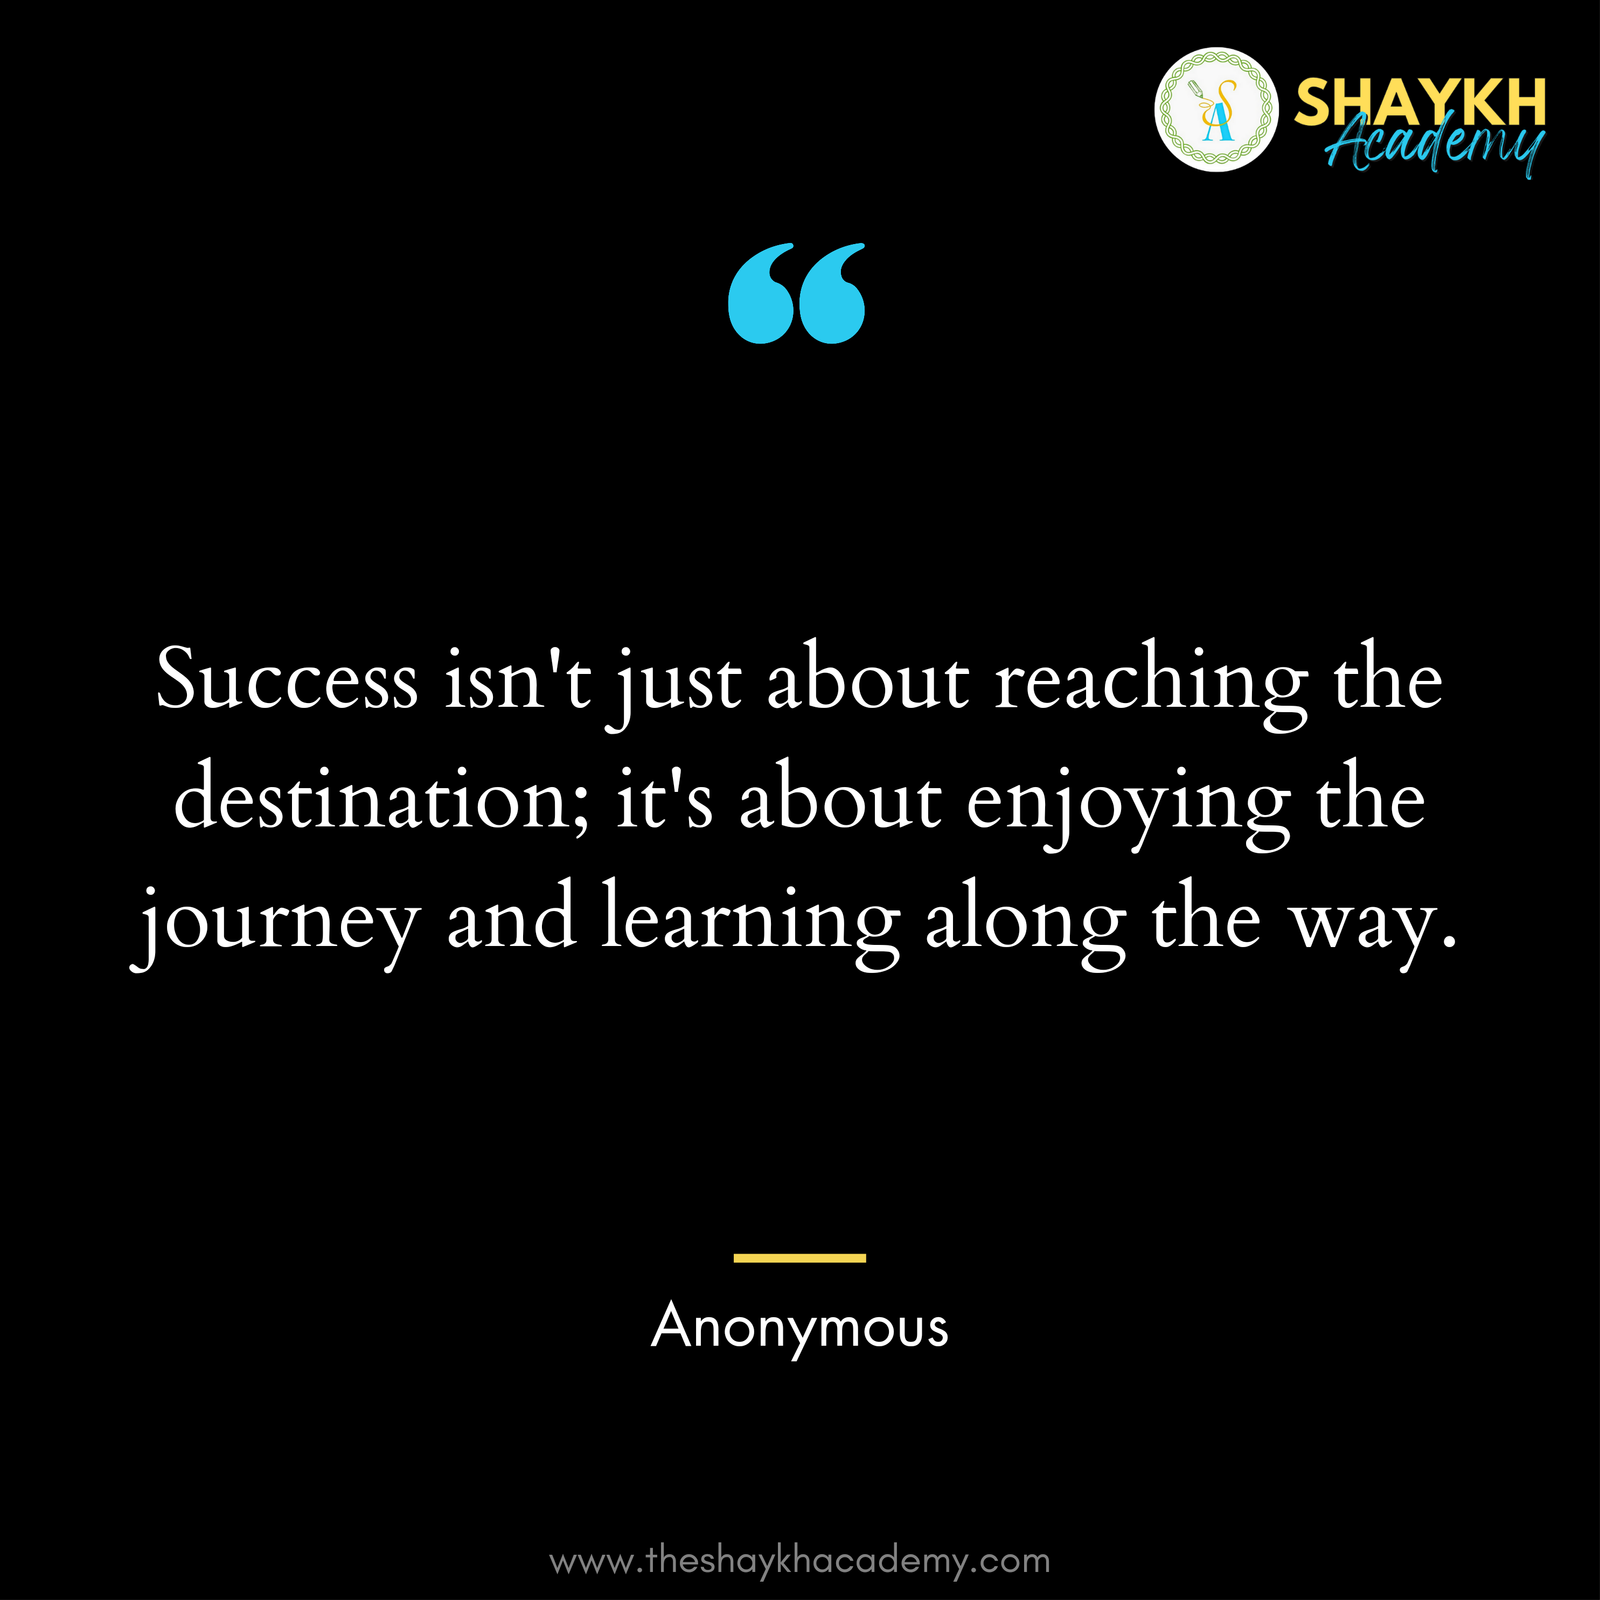 Success isn't just about reaching the destination; it's about enjoying the journey and learning along the way.